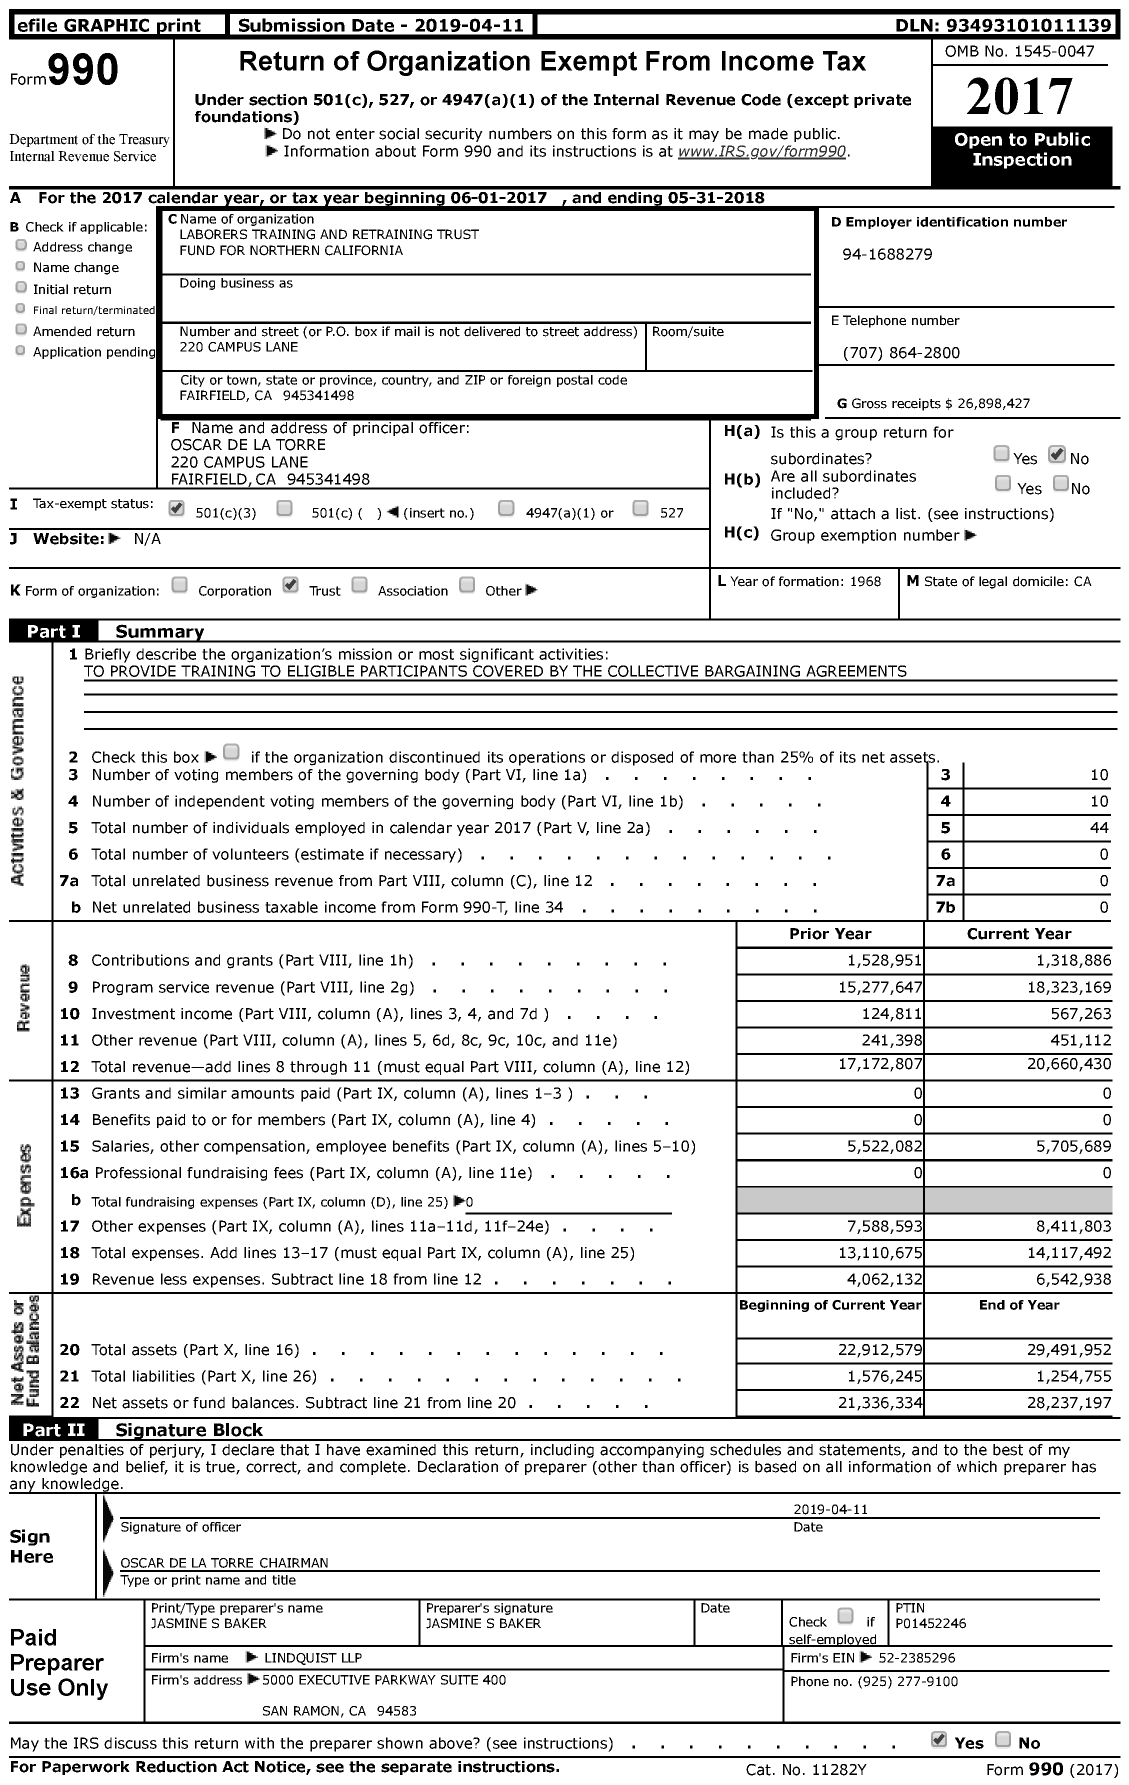 Image of first page of 2017 Form 990 for Laborers Training and Retraining Trust Fund for Northern California